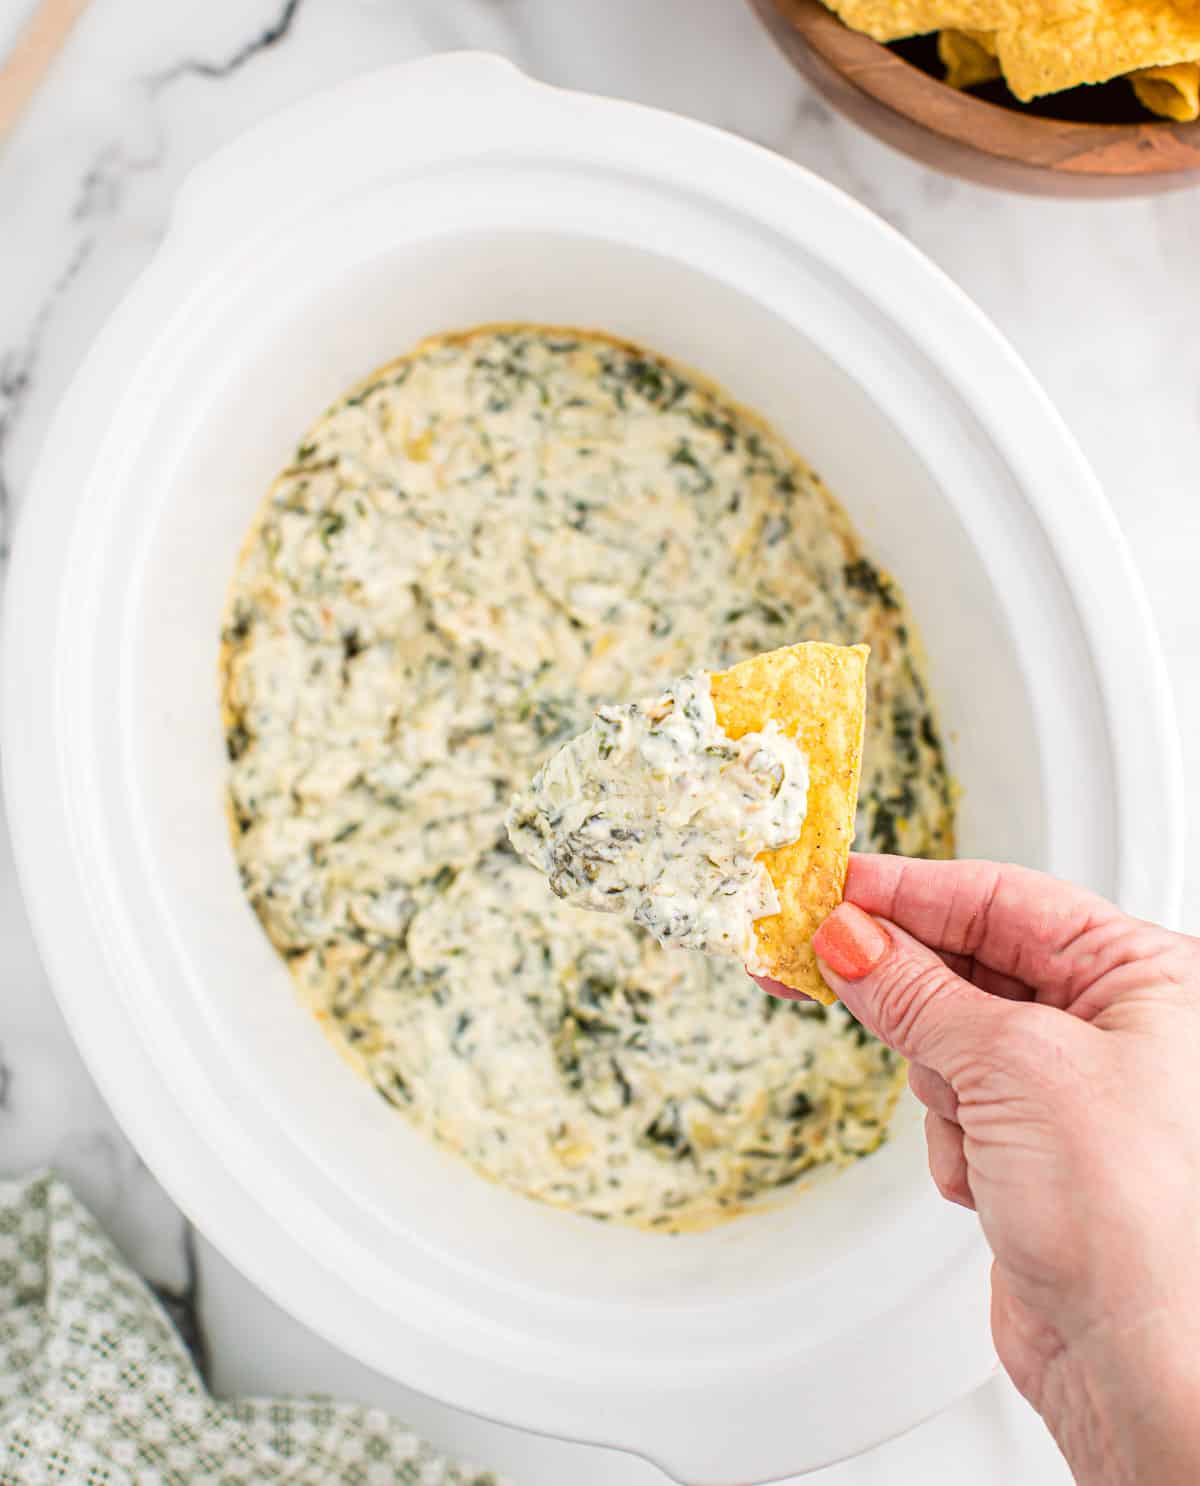 dipping a chip into a slow cooker full of spinach artichoke dip